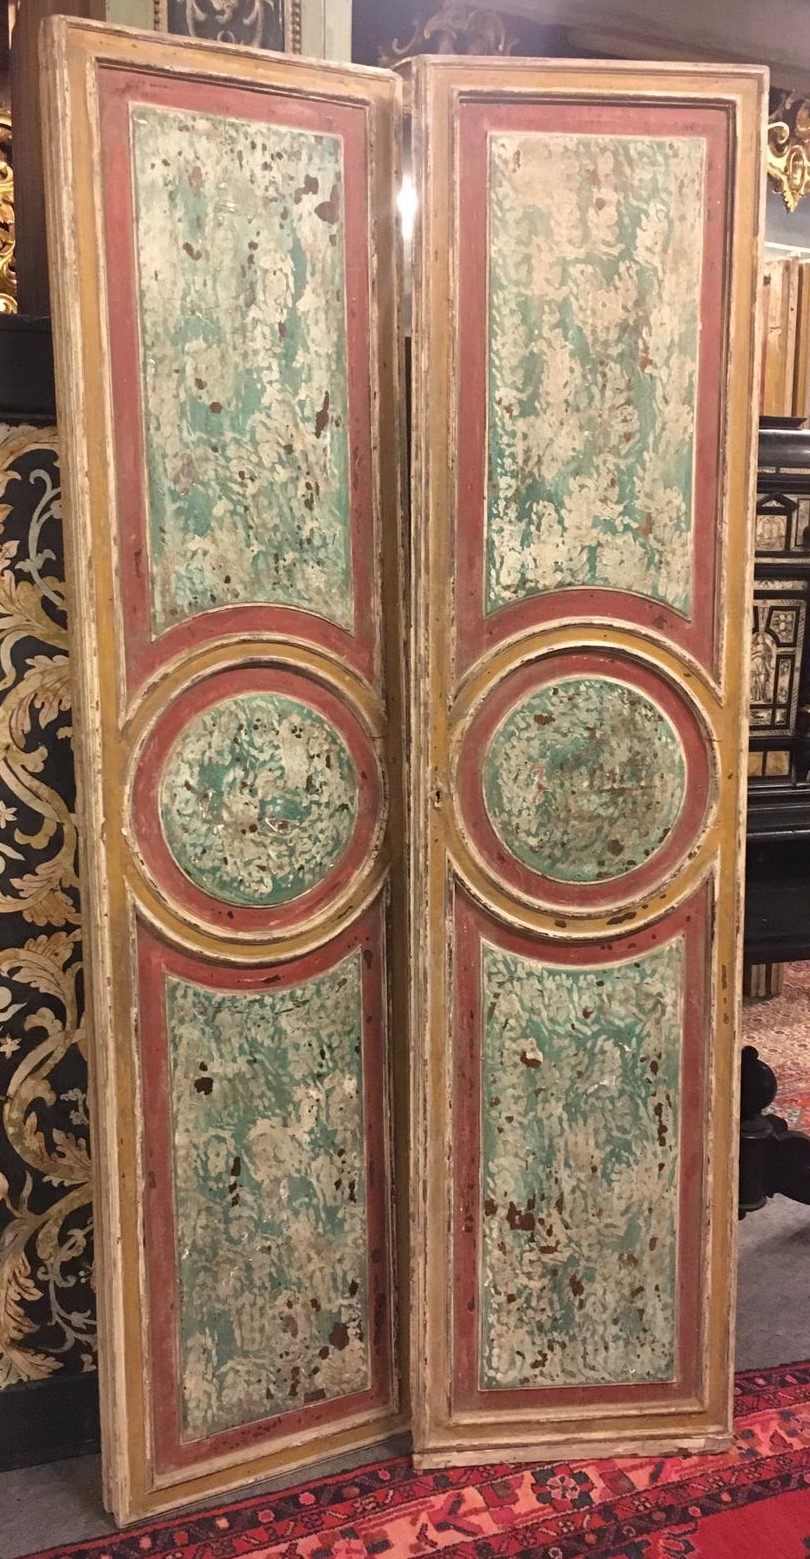 A PTS814 - N. 2 double-leaf doors lacquered, measuring cm W 100 x H 210